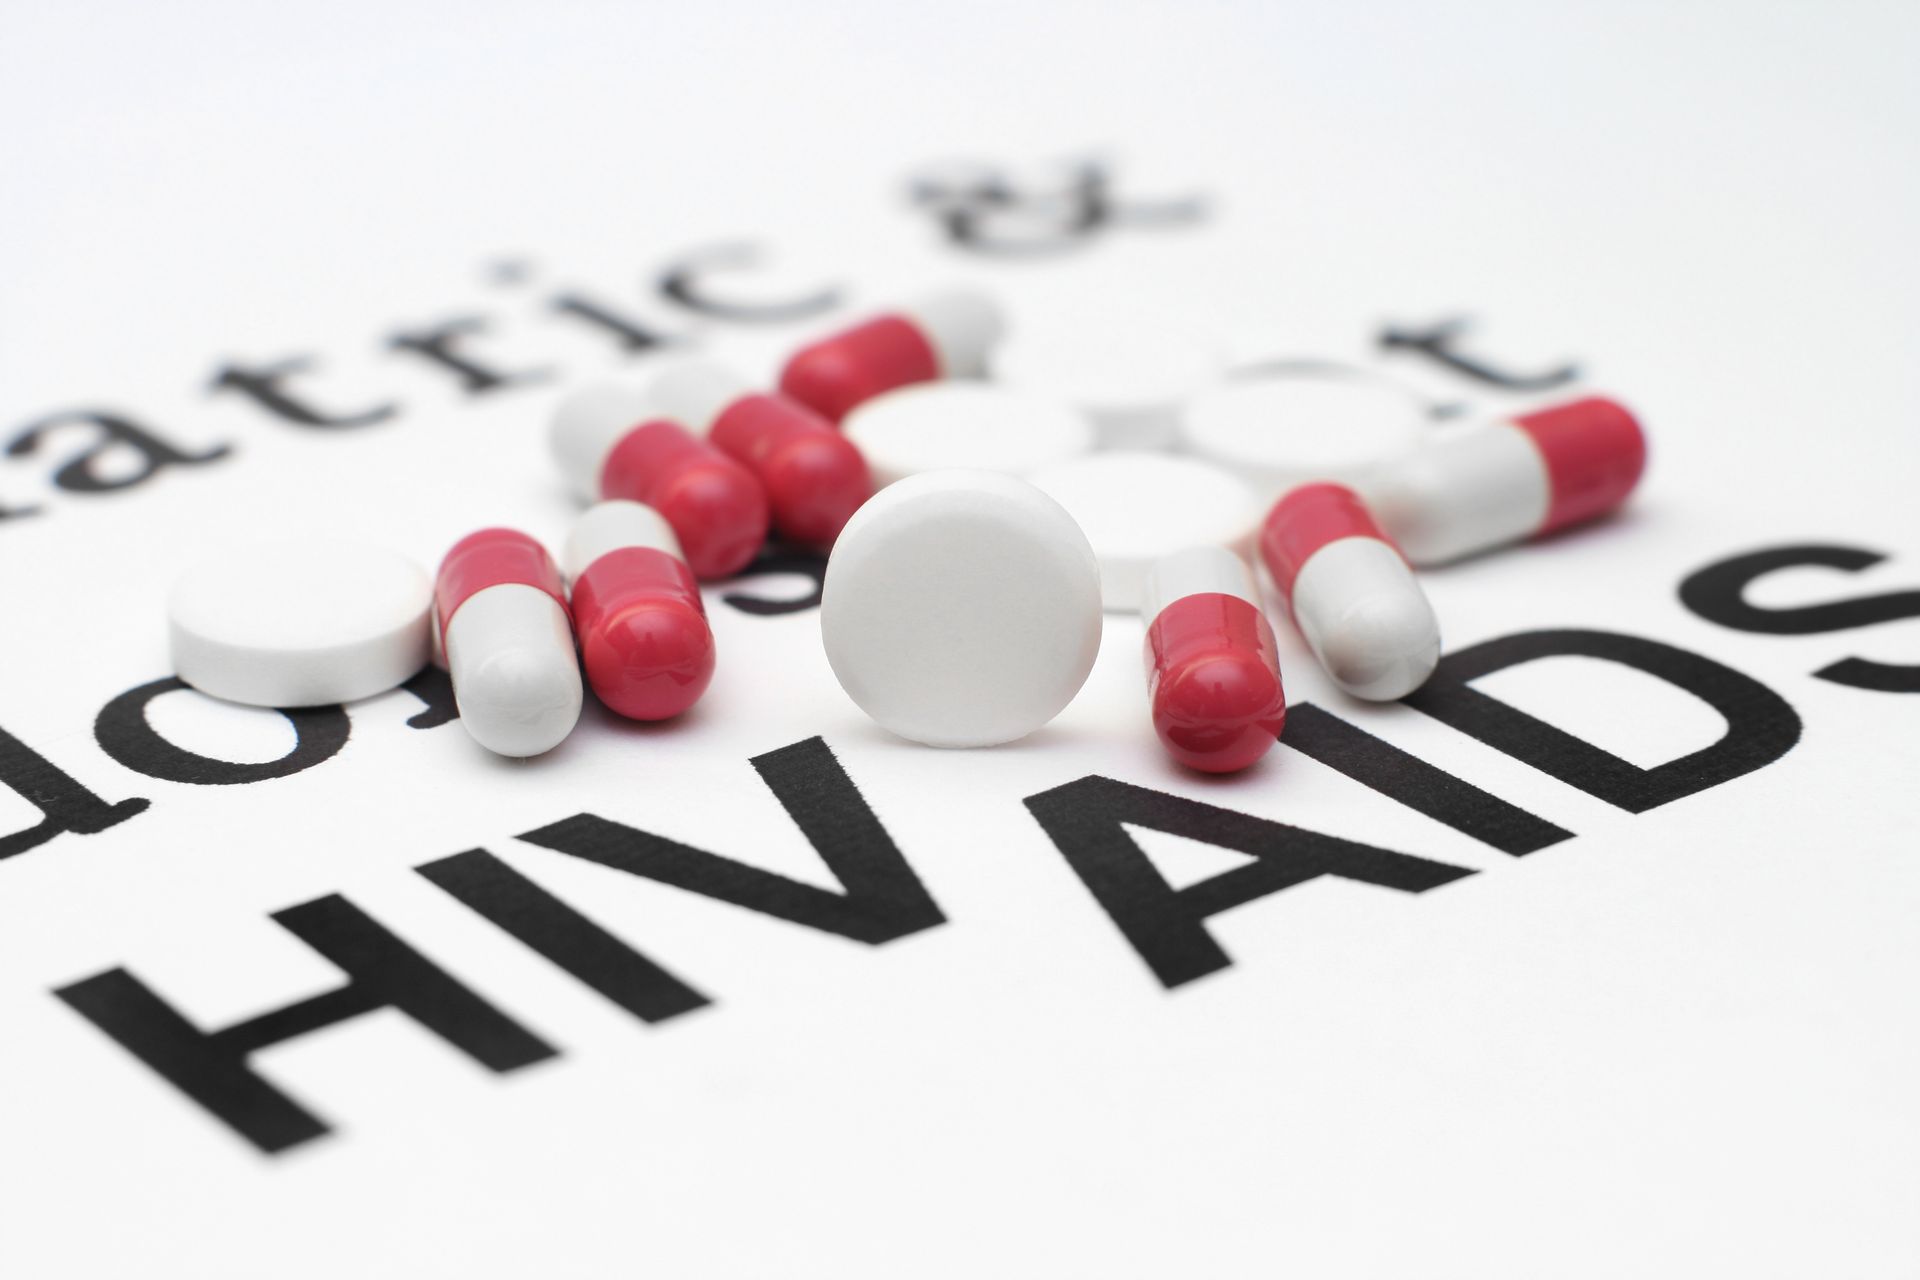 HIV and AIDS treatment